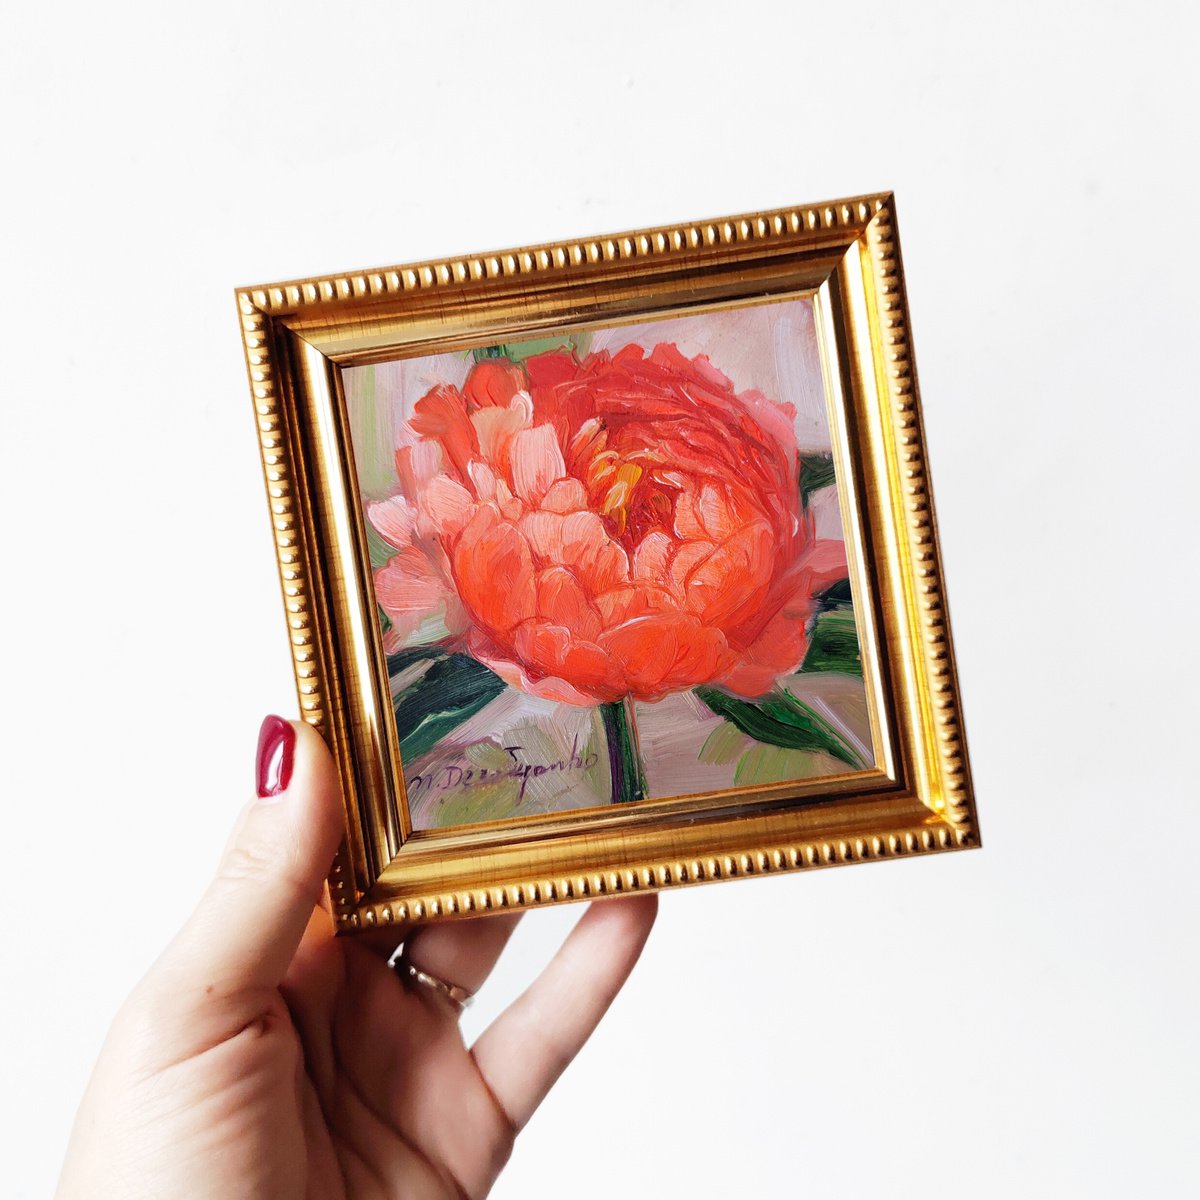 Unique peony wall art, Small oil painting pink flowers original in frame, Peonies art gift... by Nataly Derevyanko